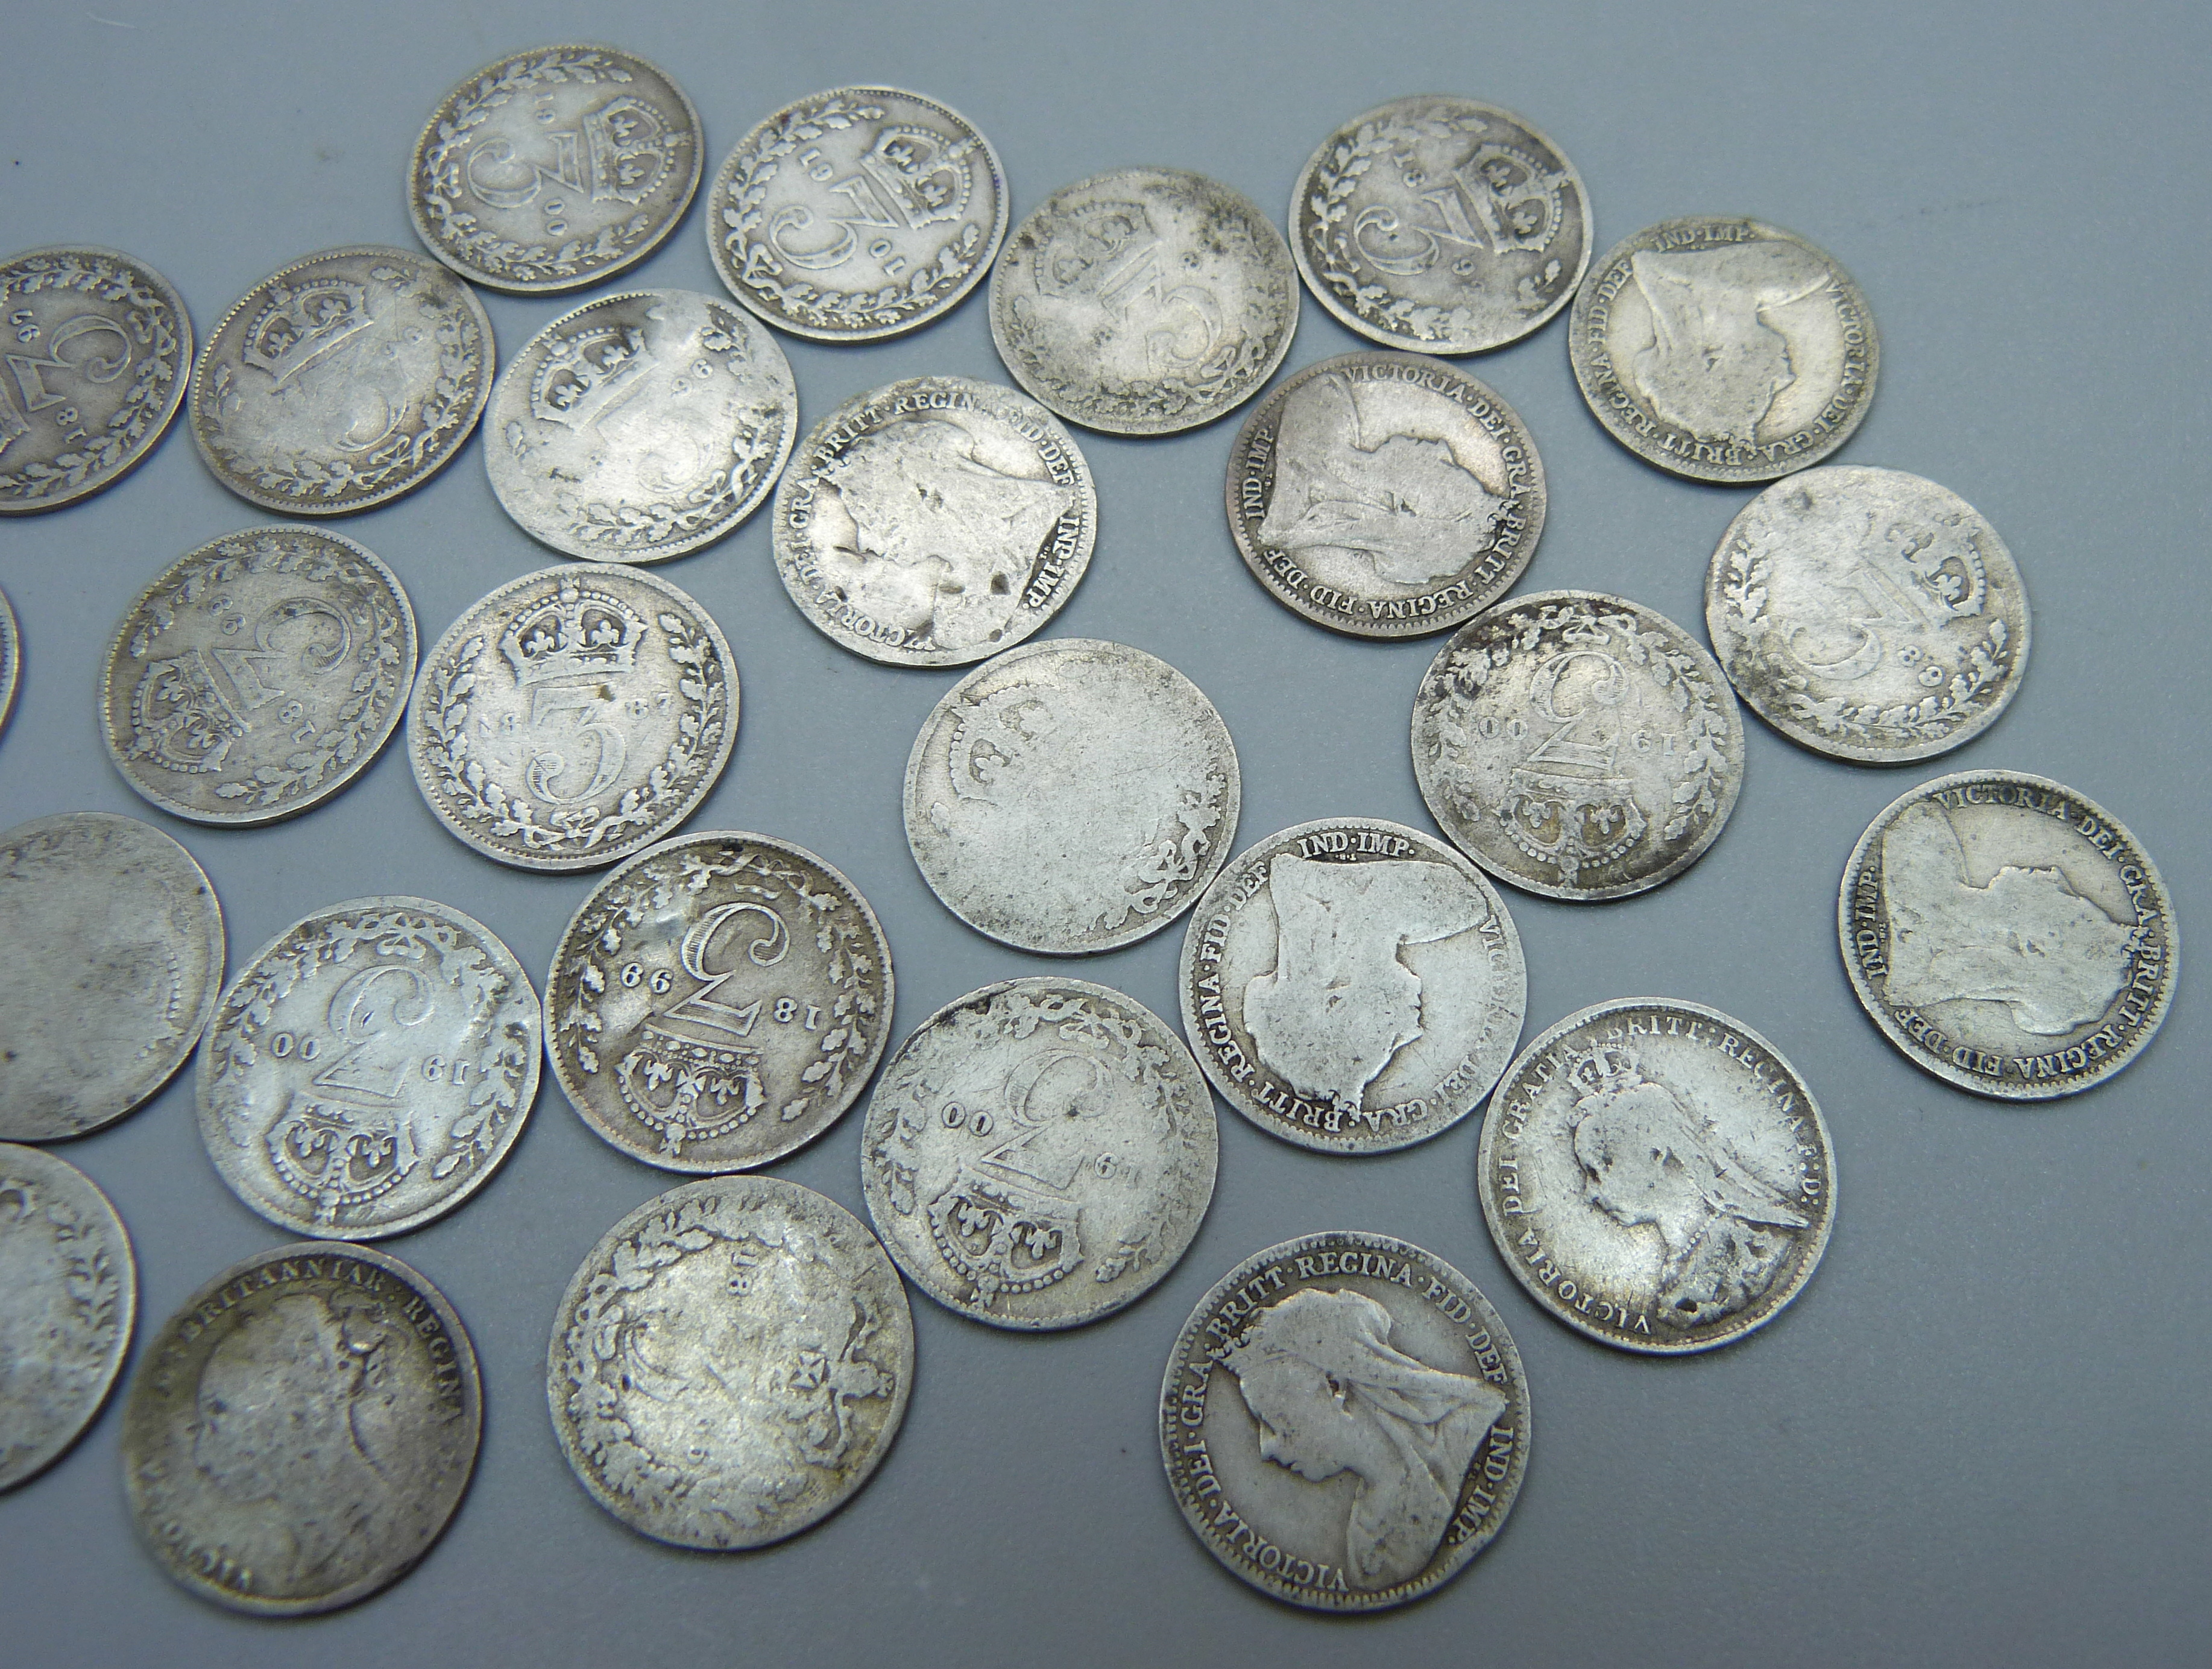 Thirty Victorian 3d coins, various dates, 39.6g - Image 2 of 3